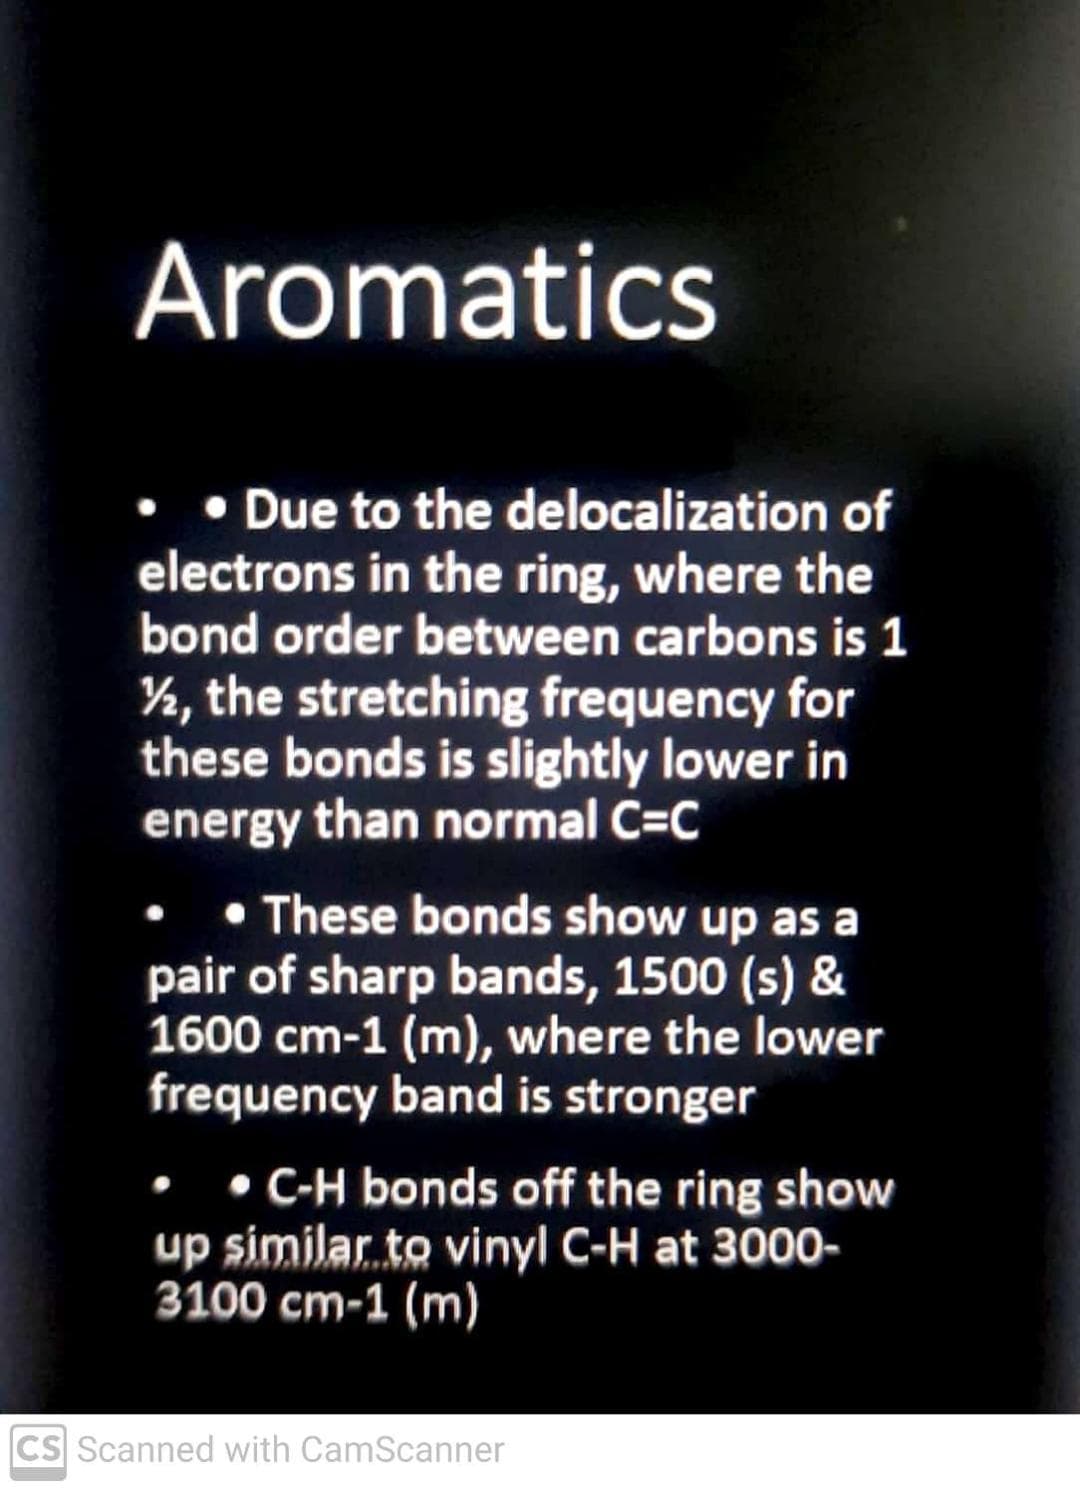 Aromatics
• Due to the delocalization of
electrons in the ring, where the
bond order between carbons is 1
½, the stretching frequency for
these bonds is slightly lower in
energy than normal C=C
• These bonds show up as a
pair of sharp bands, 1500 (s) &
1600 cm-1 (m), where the lower
frequency band is stronger
• • C-H bonds off the ring show
up similar to vinyl C-H at 3000-
3100 cm-1 (m)
CS Scanned with CamScanner
